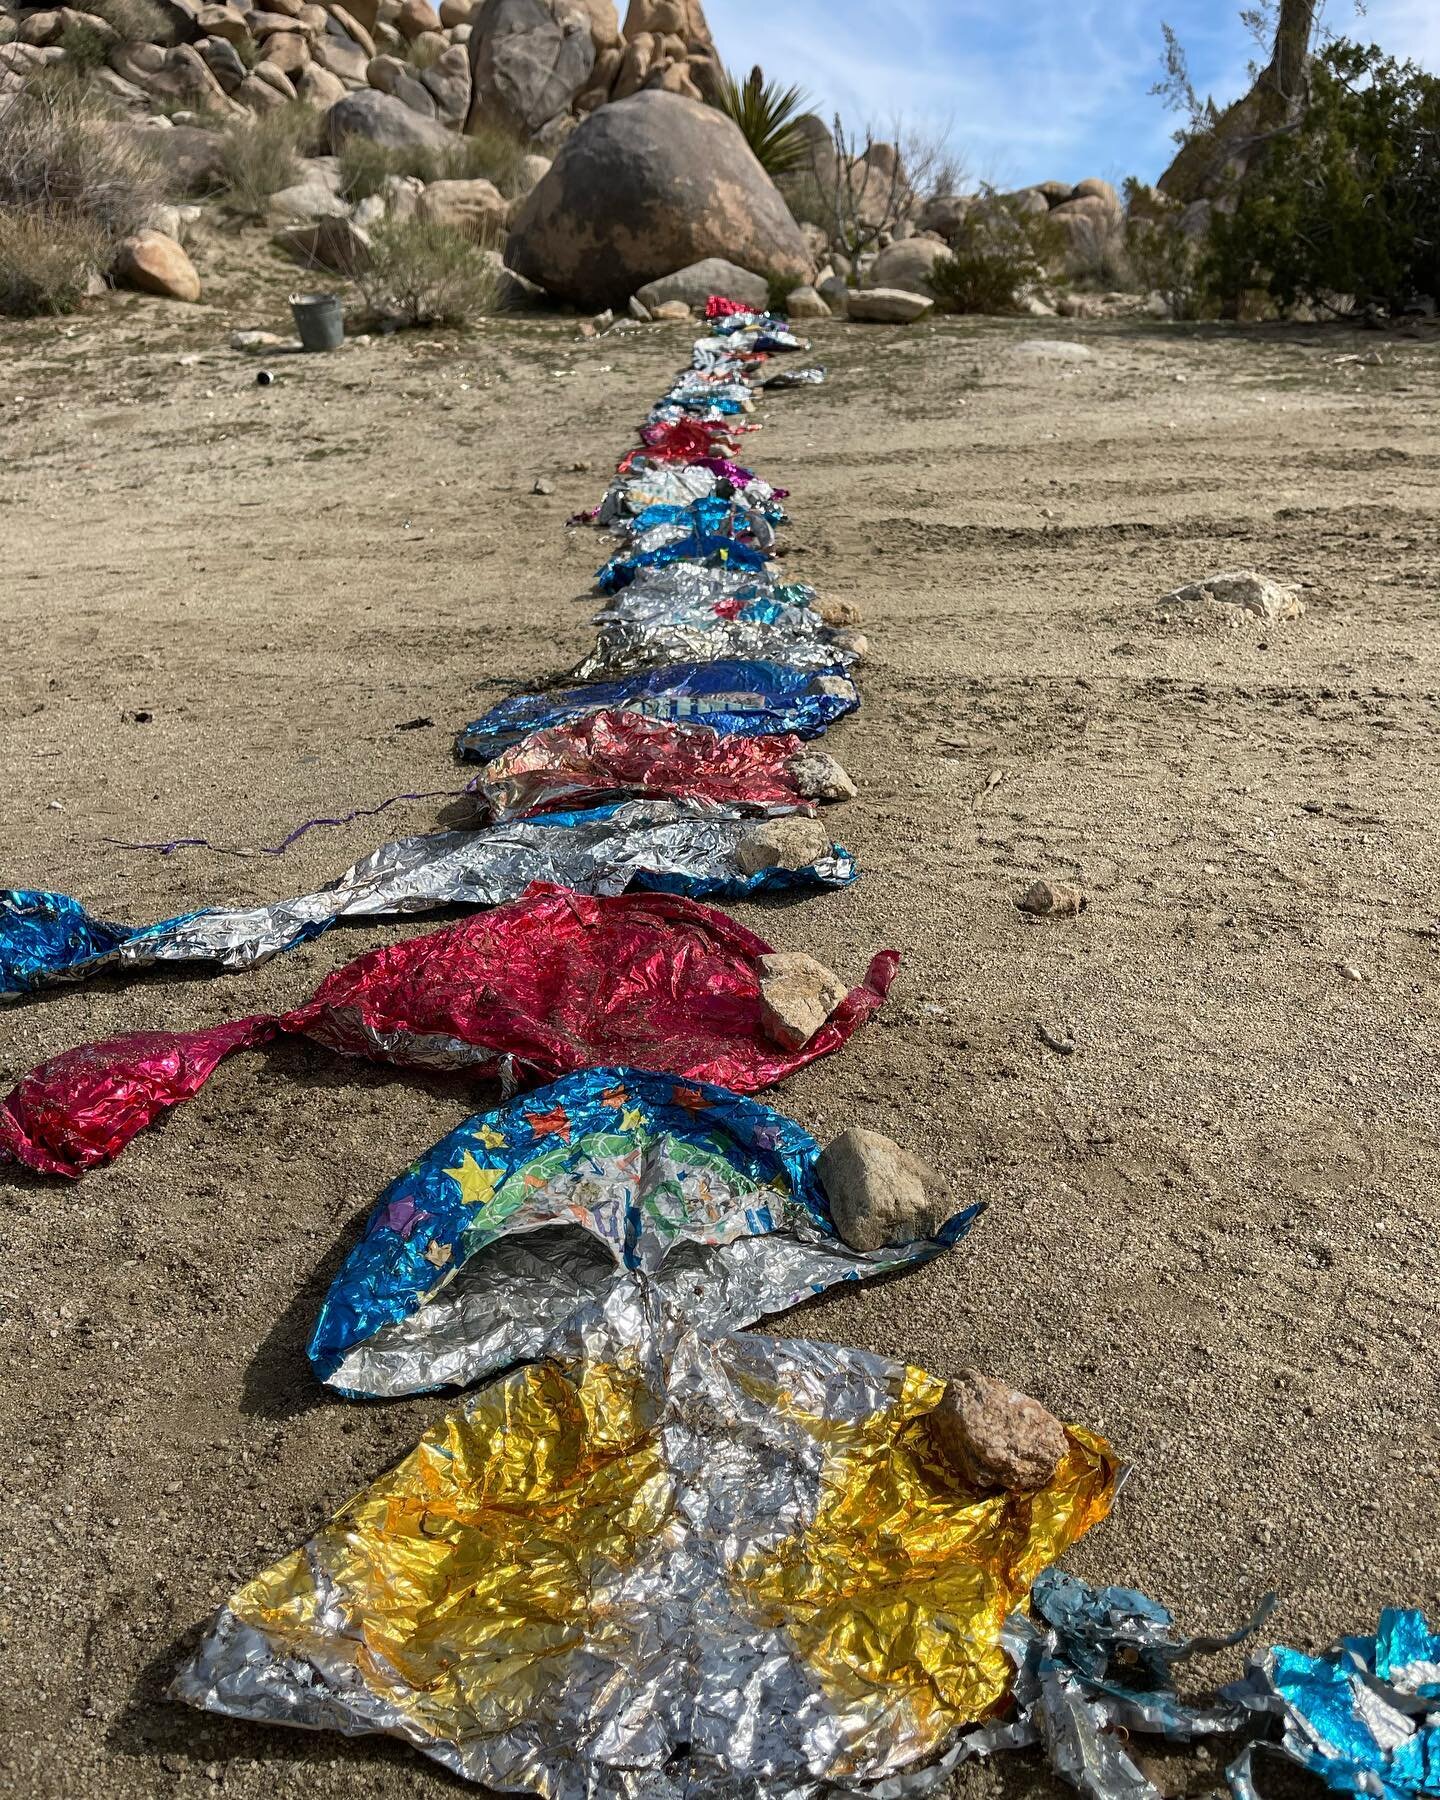 One year&rsquo;s worth of mylar balloons found while hiking in the desert by one person. 33! Friends don&rsquo;t let friends buy Mylar. They are terrible for the environment and both marine and terrestrial animals mistake them for food. &hearts;️🌍🐢